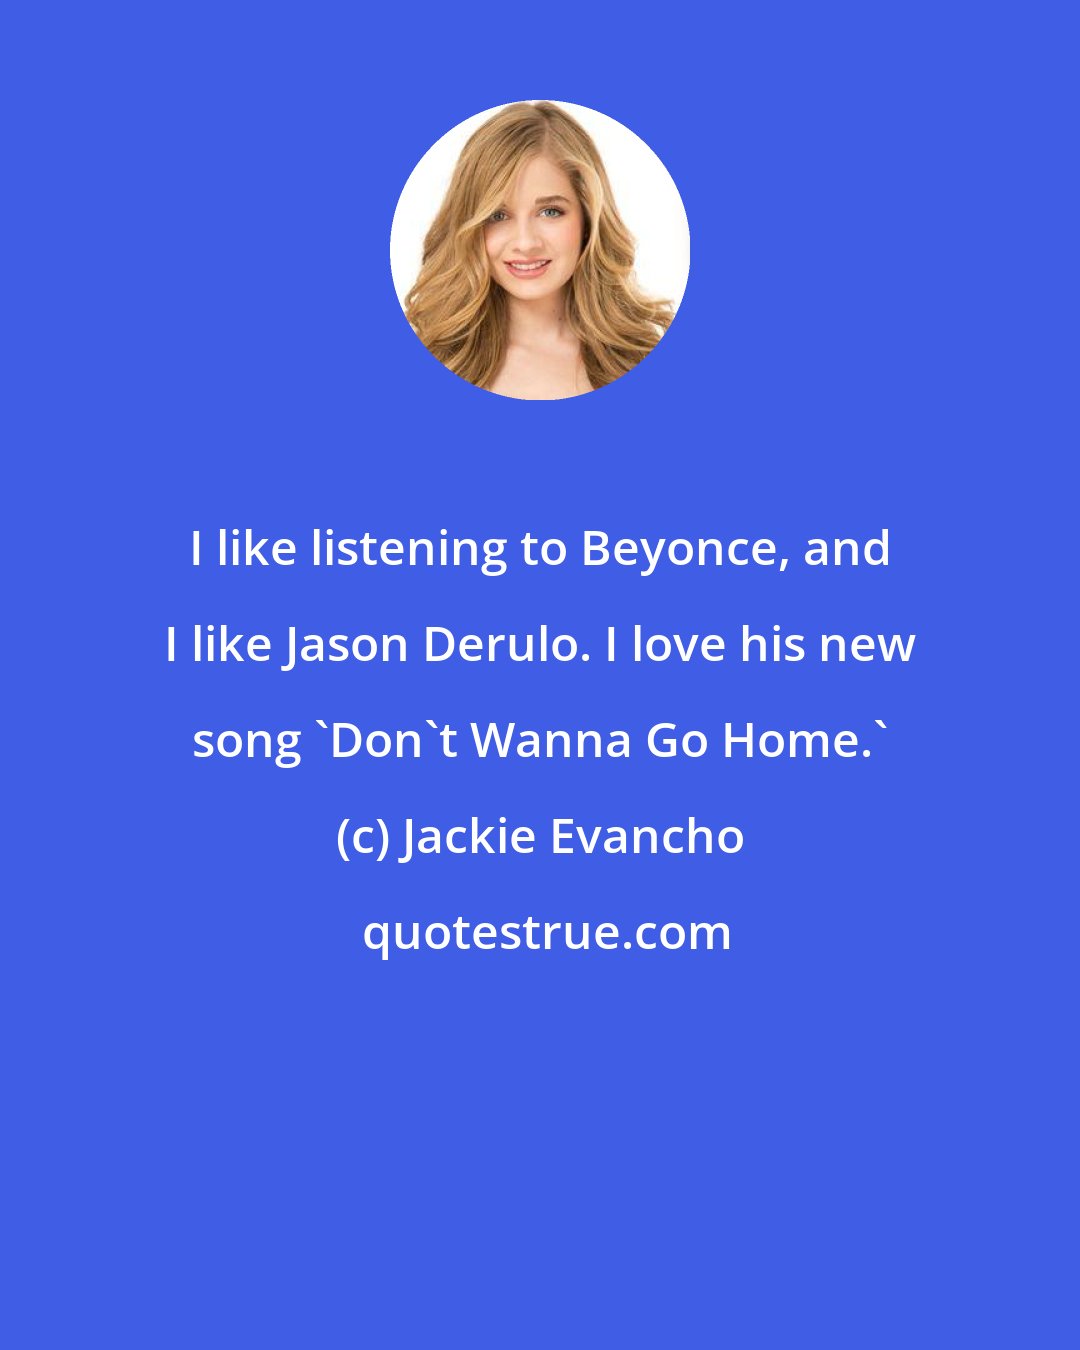 Jackie Evancho: I like listening to Beyonce, and I like Jason Derulo. I love his new song 'Don't Wanna Go Home.'